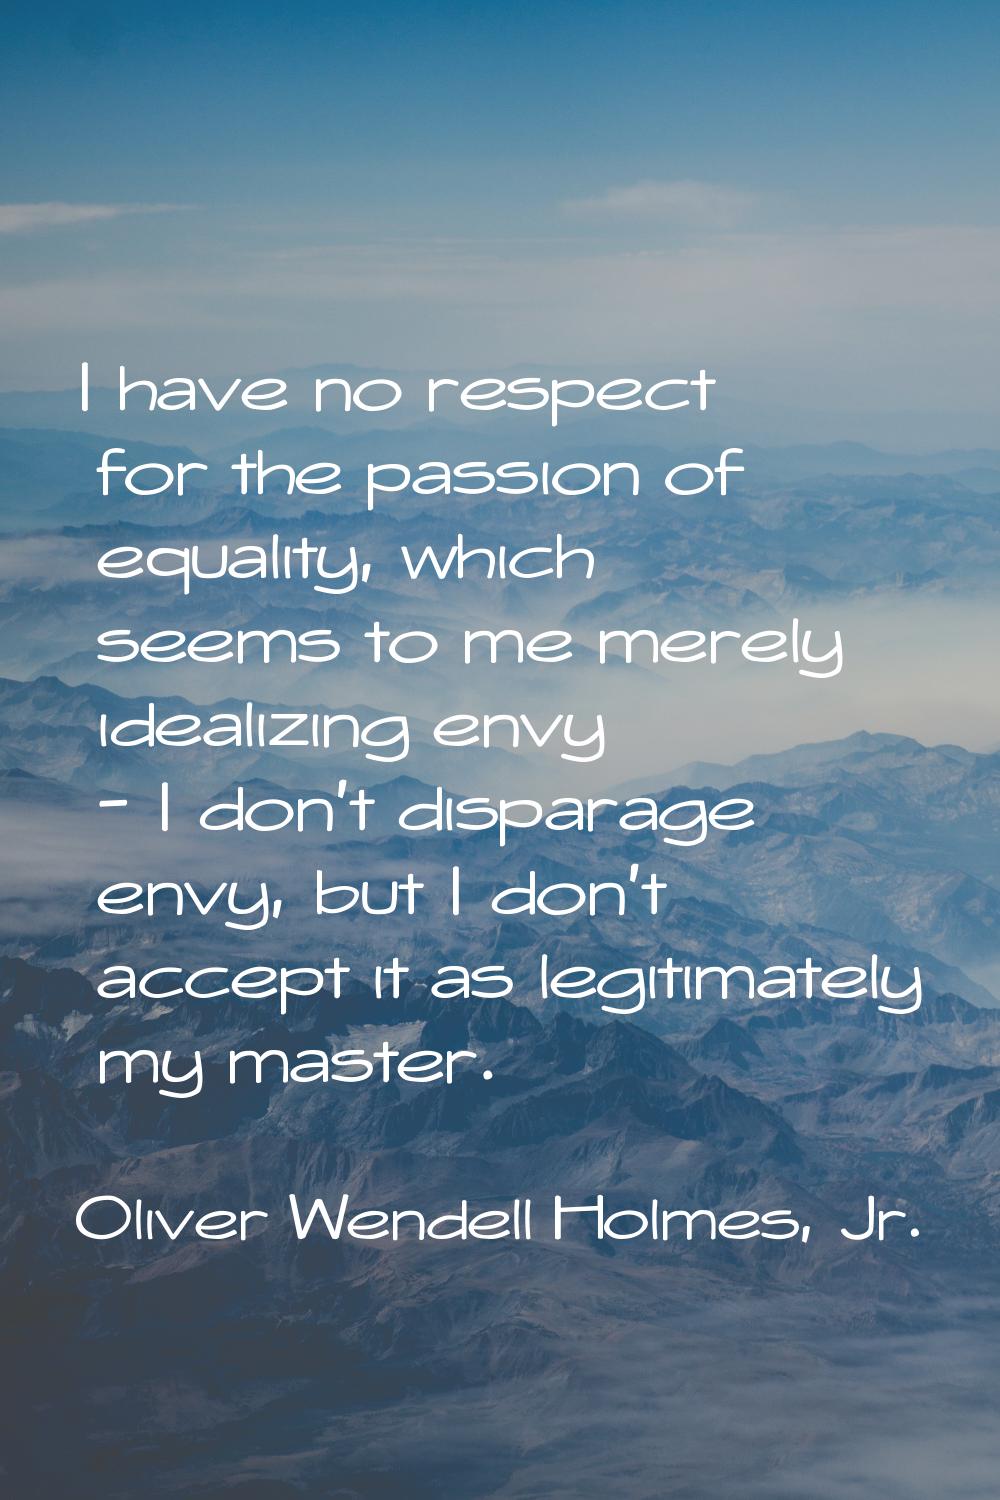 I have no respect for the passion of equality, which seems to me merely idealizing envy - I don't d